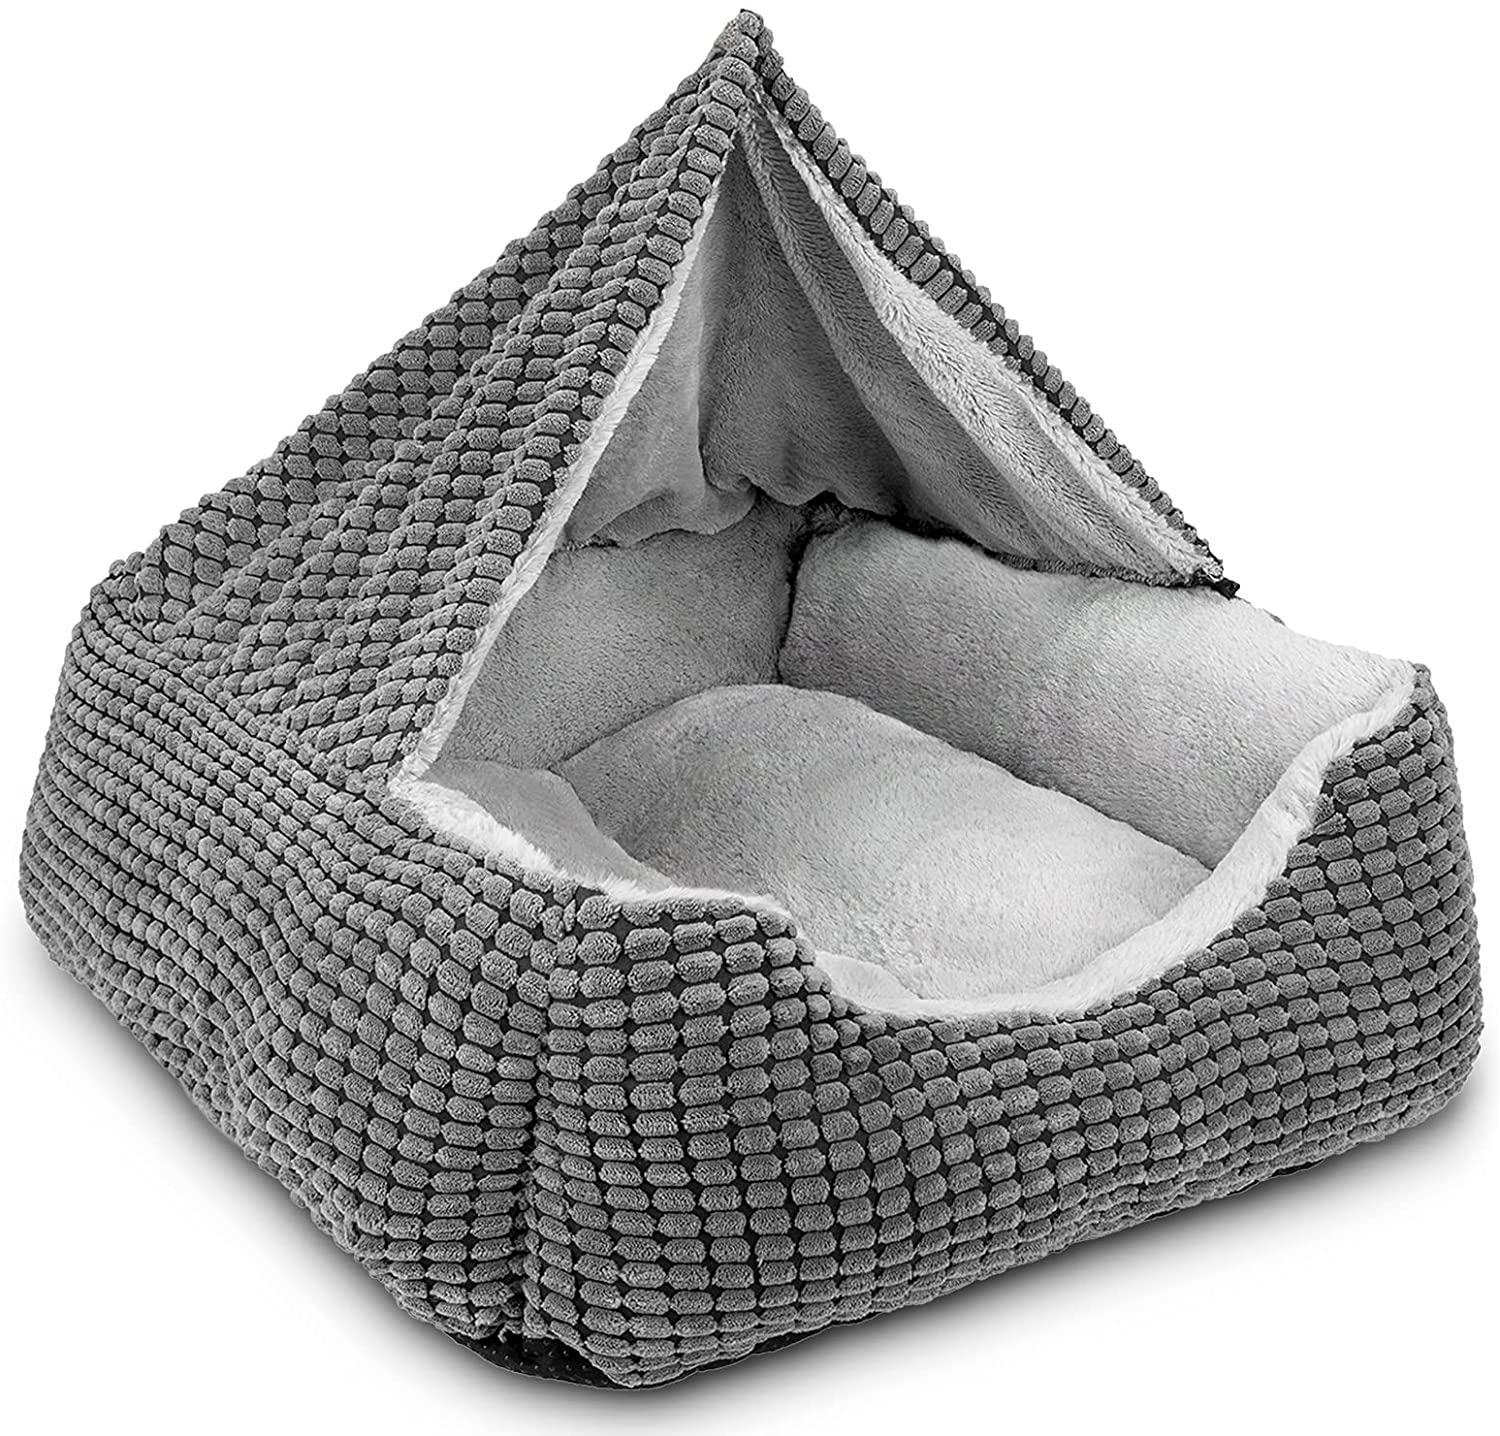 GASUR Dog Beds for Large Medium Small Dogs, Rectangle Cave Hooded Blanket Puppy Bed, Luxury Anti-Anxiety Orthopedic Cat Beds for Indoor Cats, Warmth and Machine Washable Animals & Pet Supplies > Pet Supplies > Dog Supplies > Dog Beds GASUR Grey 20 inches 